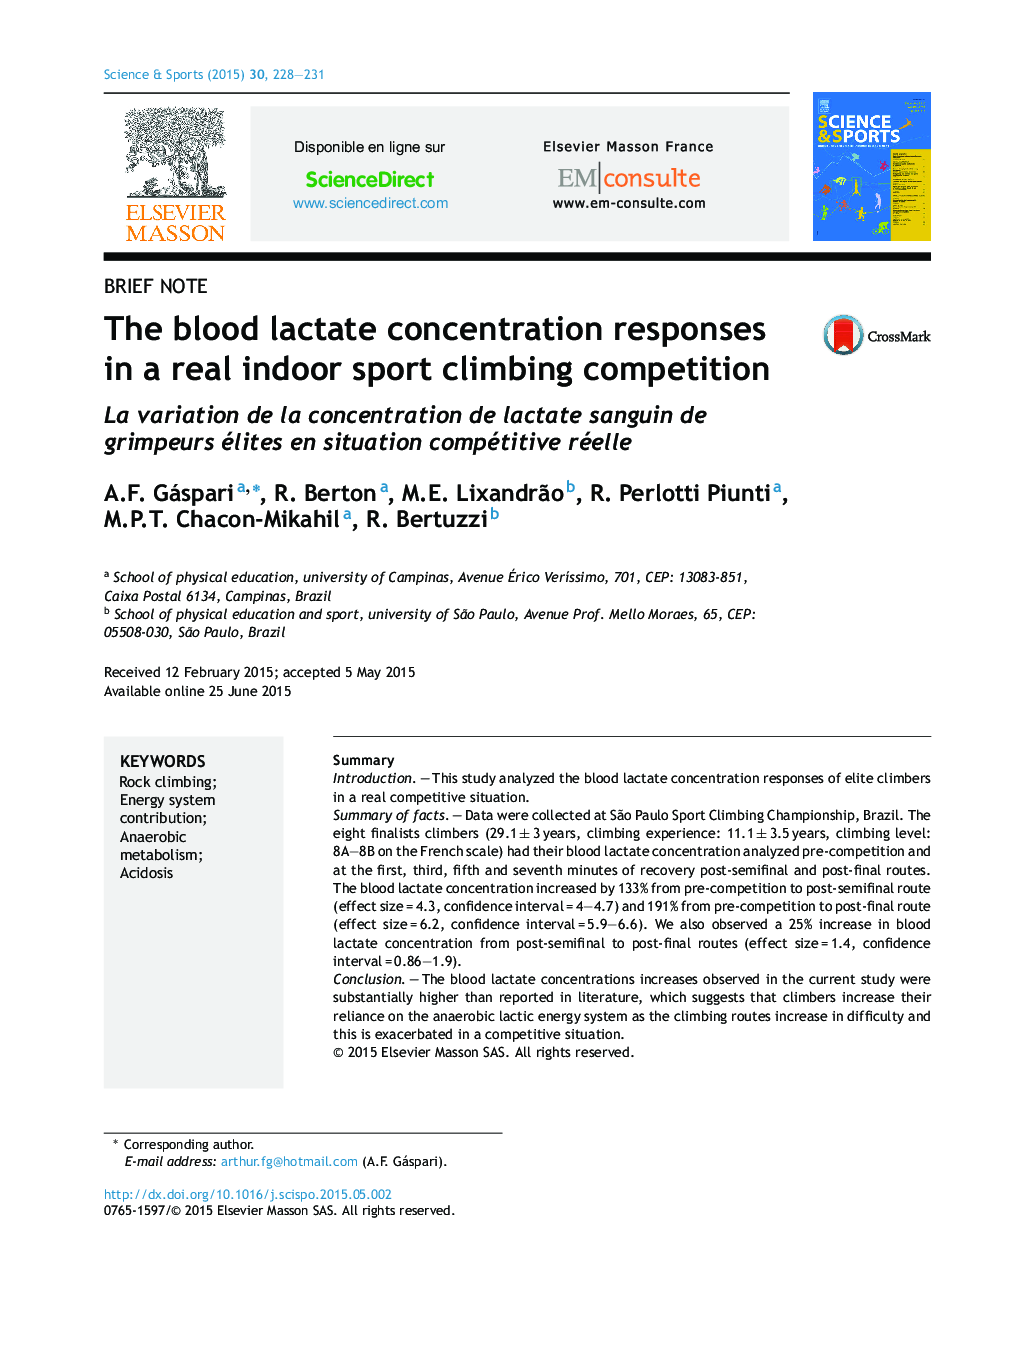 The blood lactate concentration responses in a real indoor sport climbing competition